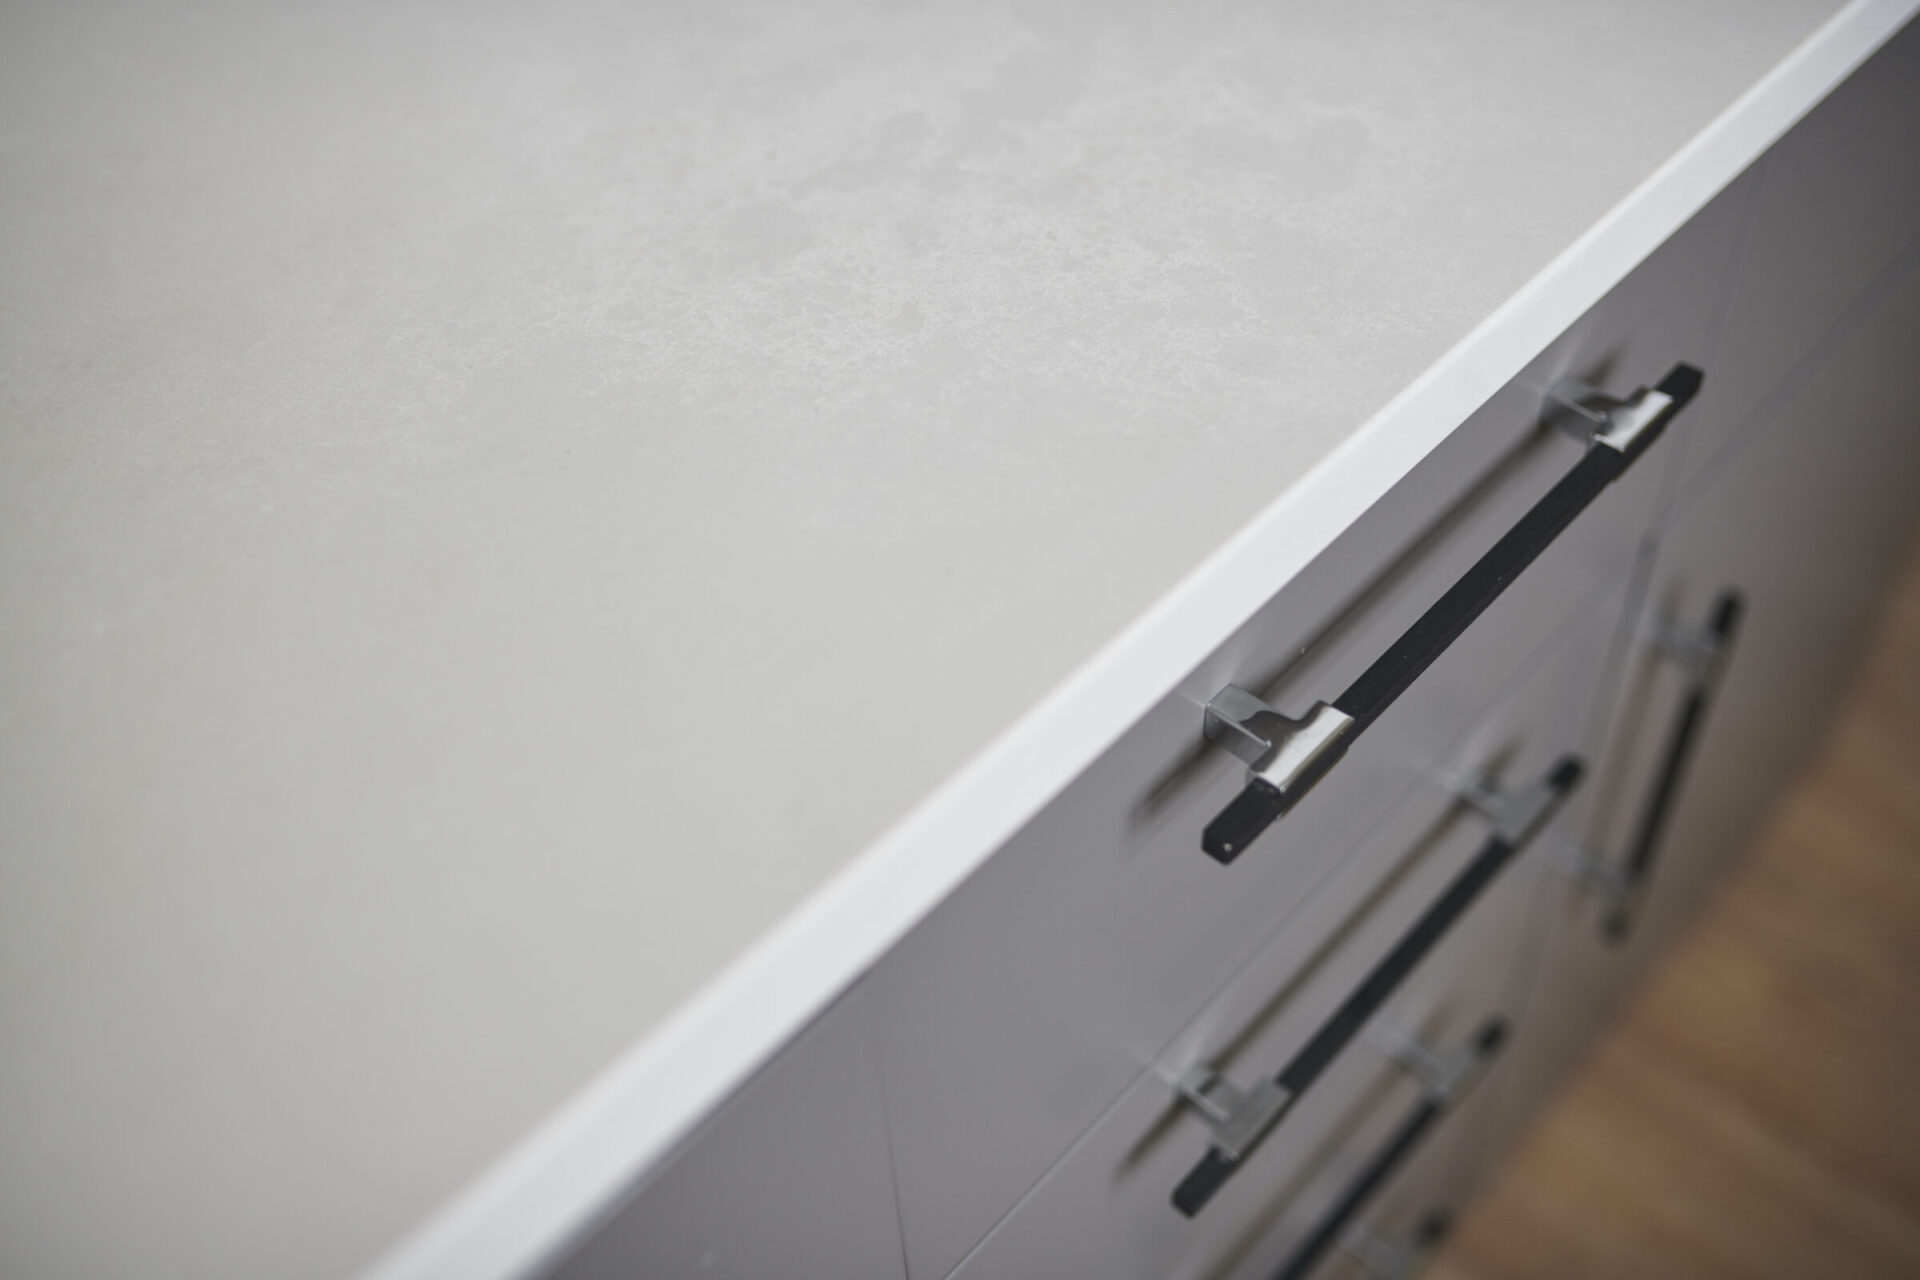 This image shows a close-up of a modern kitchen countertop with a shallow depth of field, focusing on a drawer handle among several cabinets.